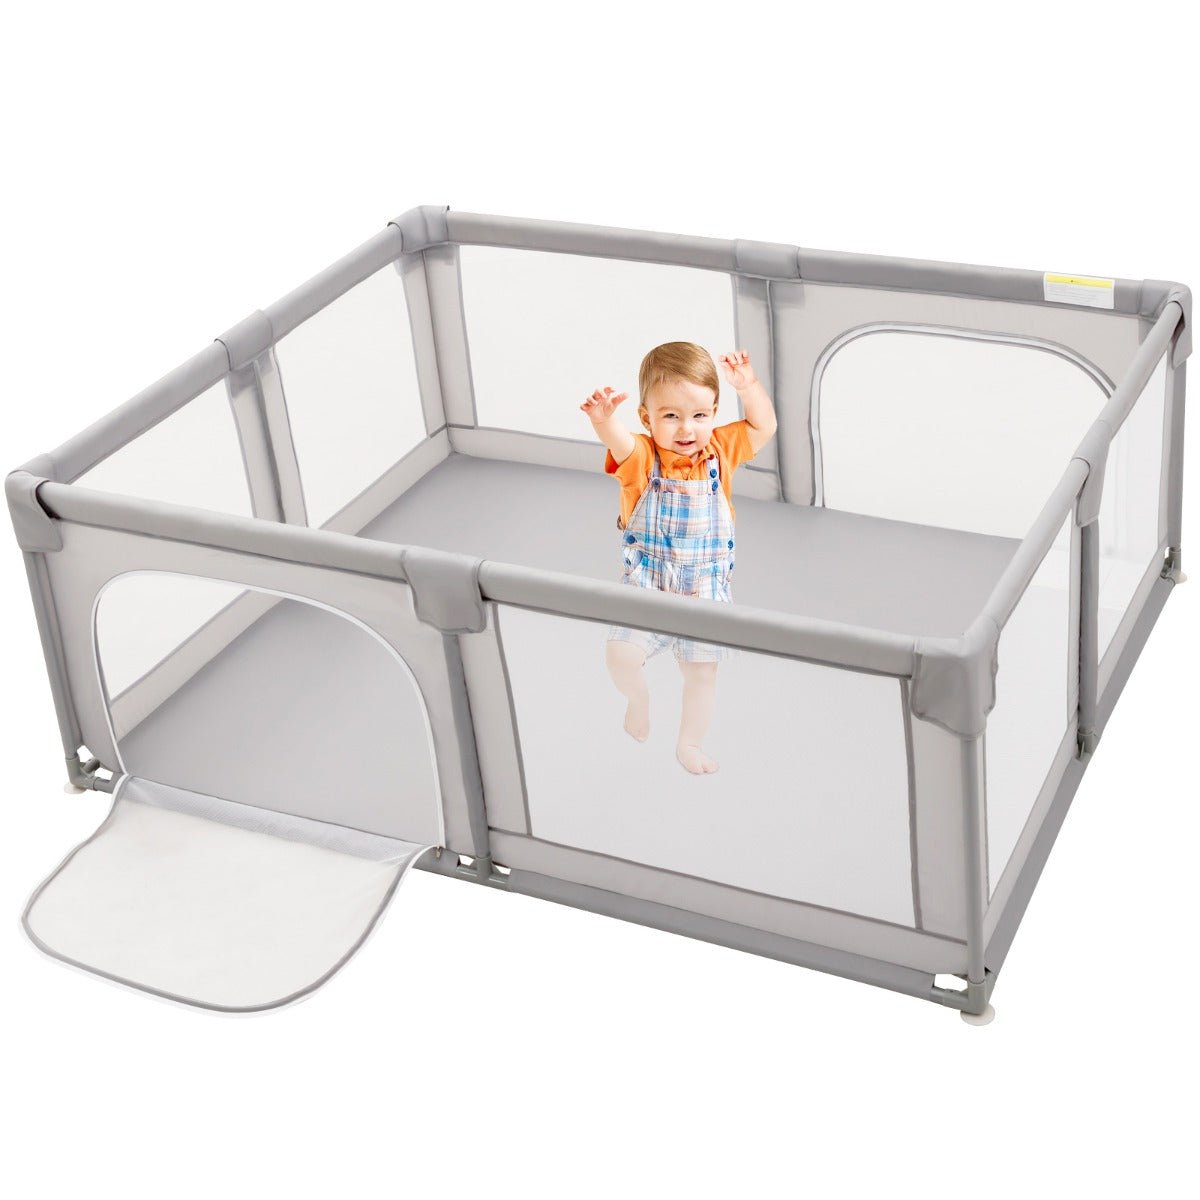 Baby Play Yard with Safety Lock and Playful Features